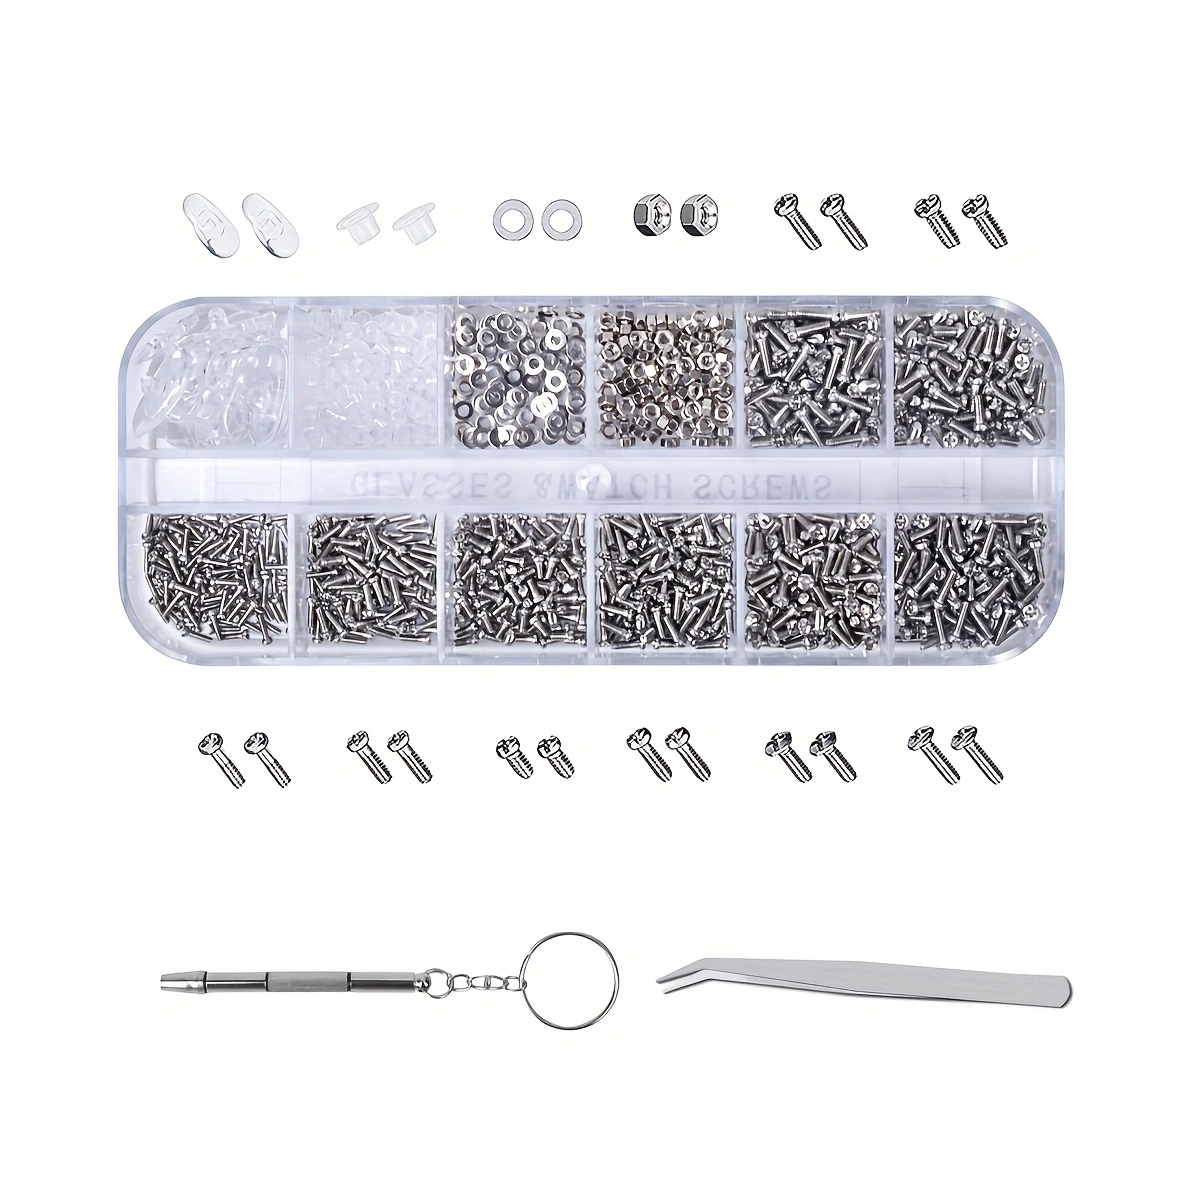  Eyeglasses Repair Kit, 1100PCS Eyeglass Screws and 6 Pcs  Precision Screwdriver Set and Tweezers for Glasses, Sunglass, Jewelry,  Spectacles and Watche : Health & Household